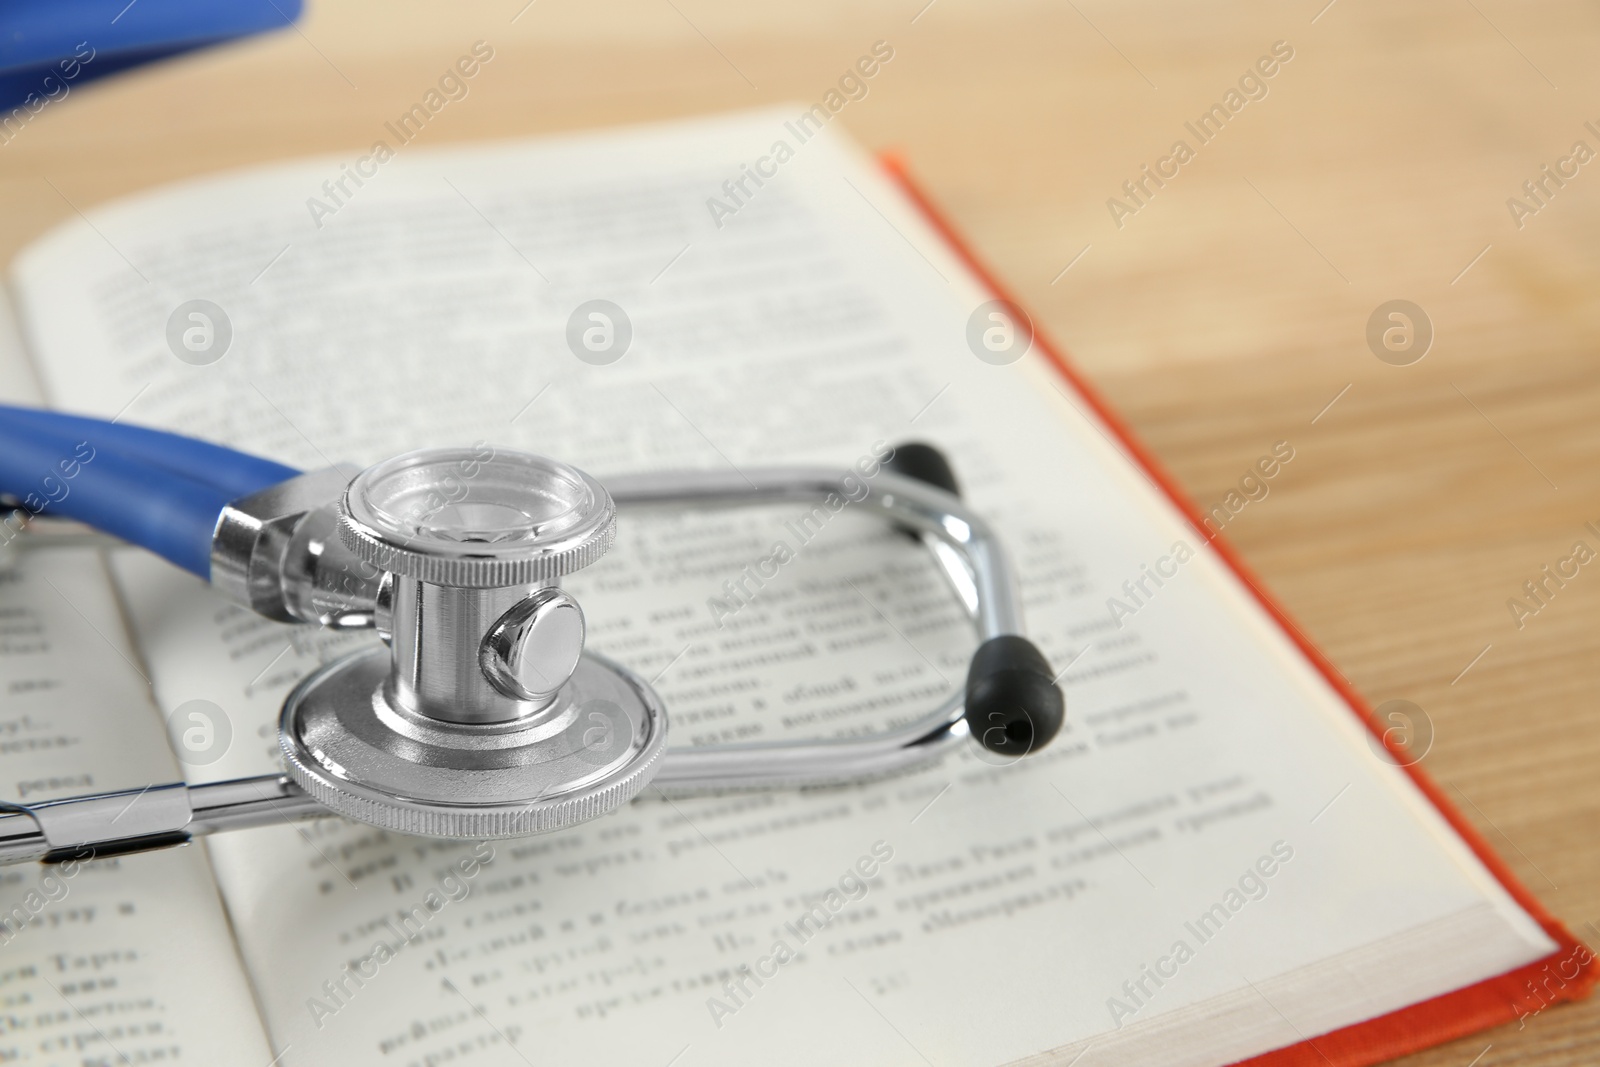 Photo of One new medical stethoscope on wooden table, closeup